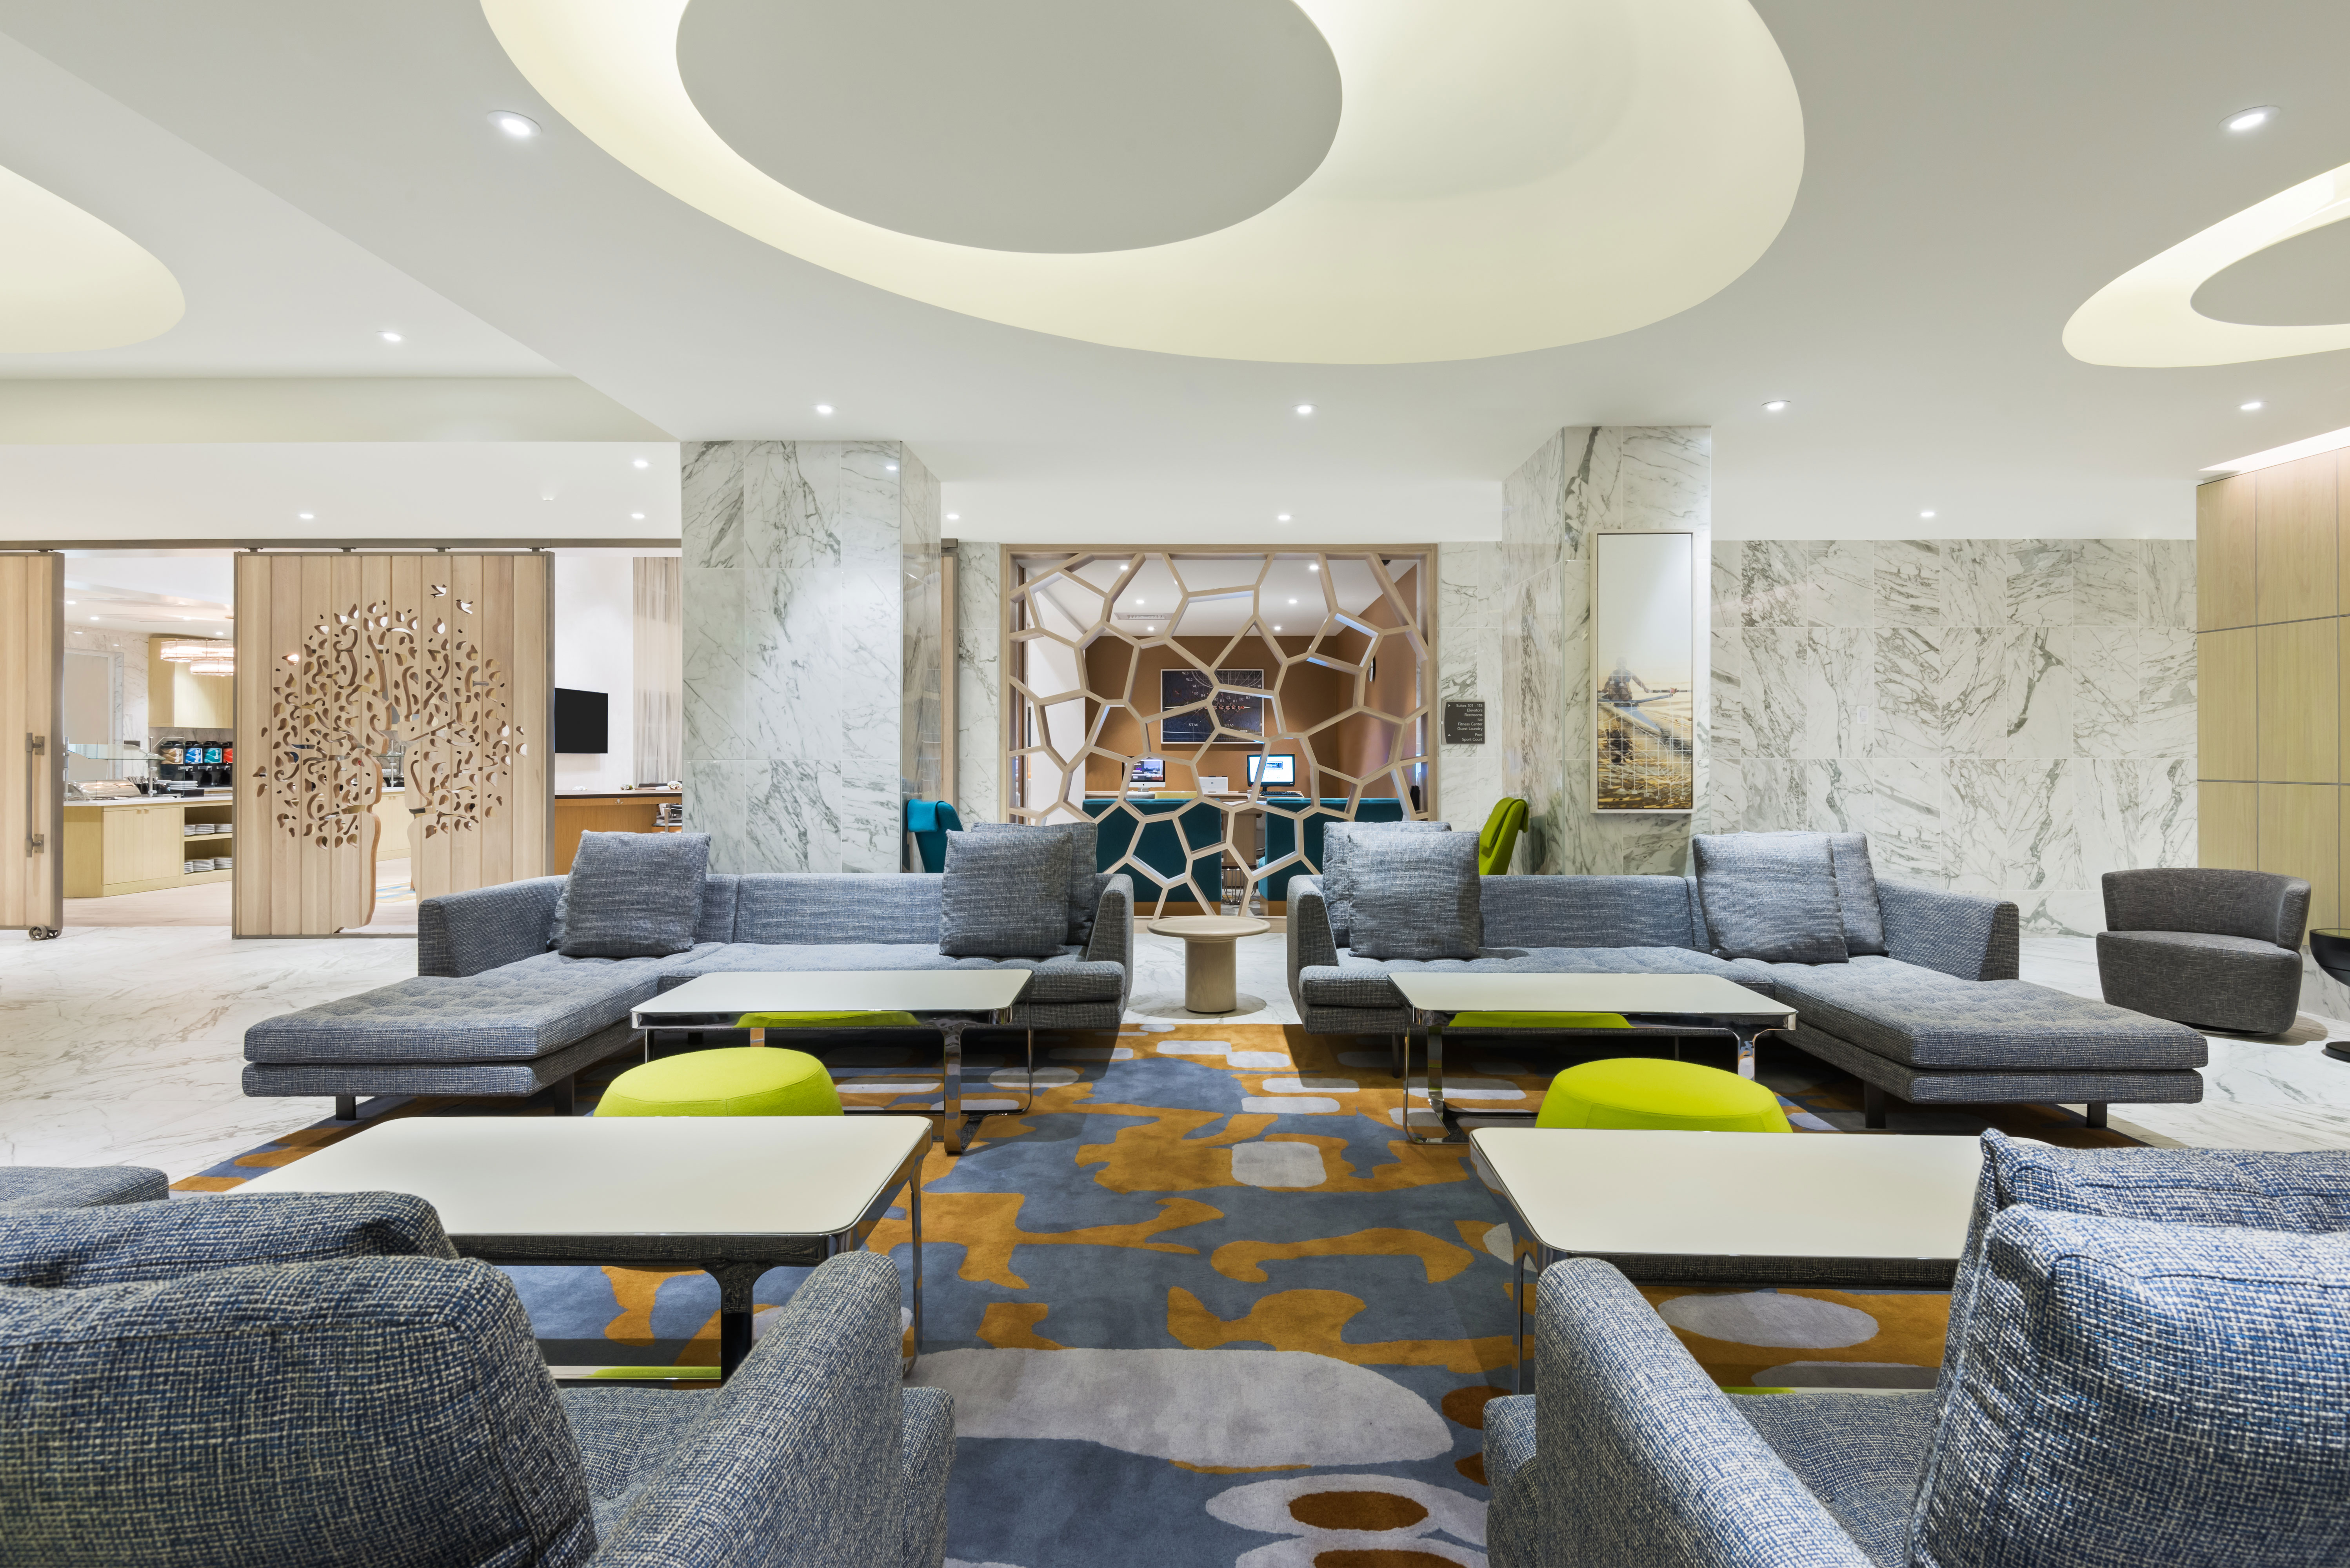 Four Large Grey Sofas with Square Tables and Two Yellow Ottomans in Lobby Seating Area